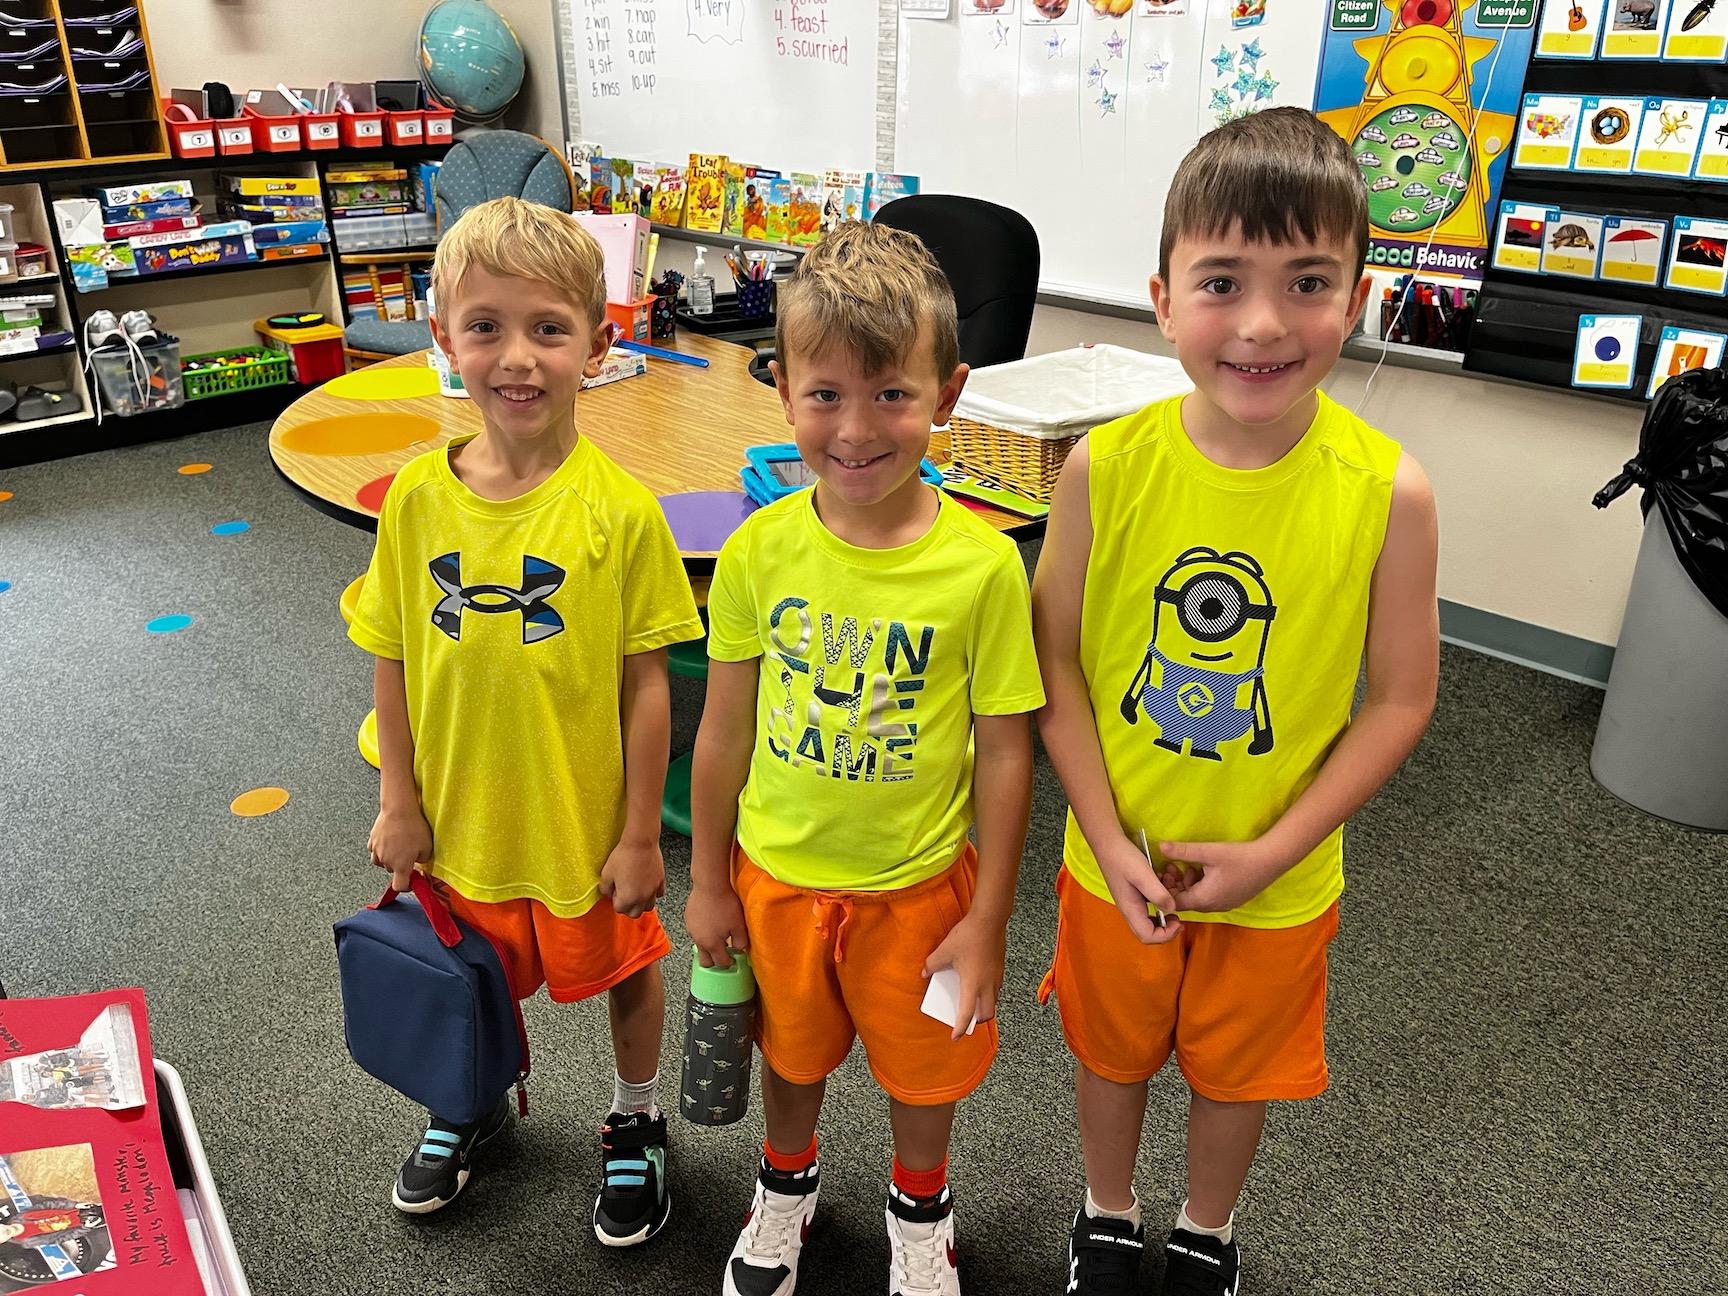 Level Green 1st-graders Connor Nese, Maverick Conley, and Ethan Borst on Neon Day